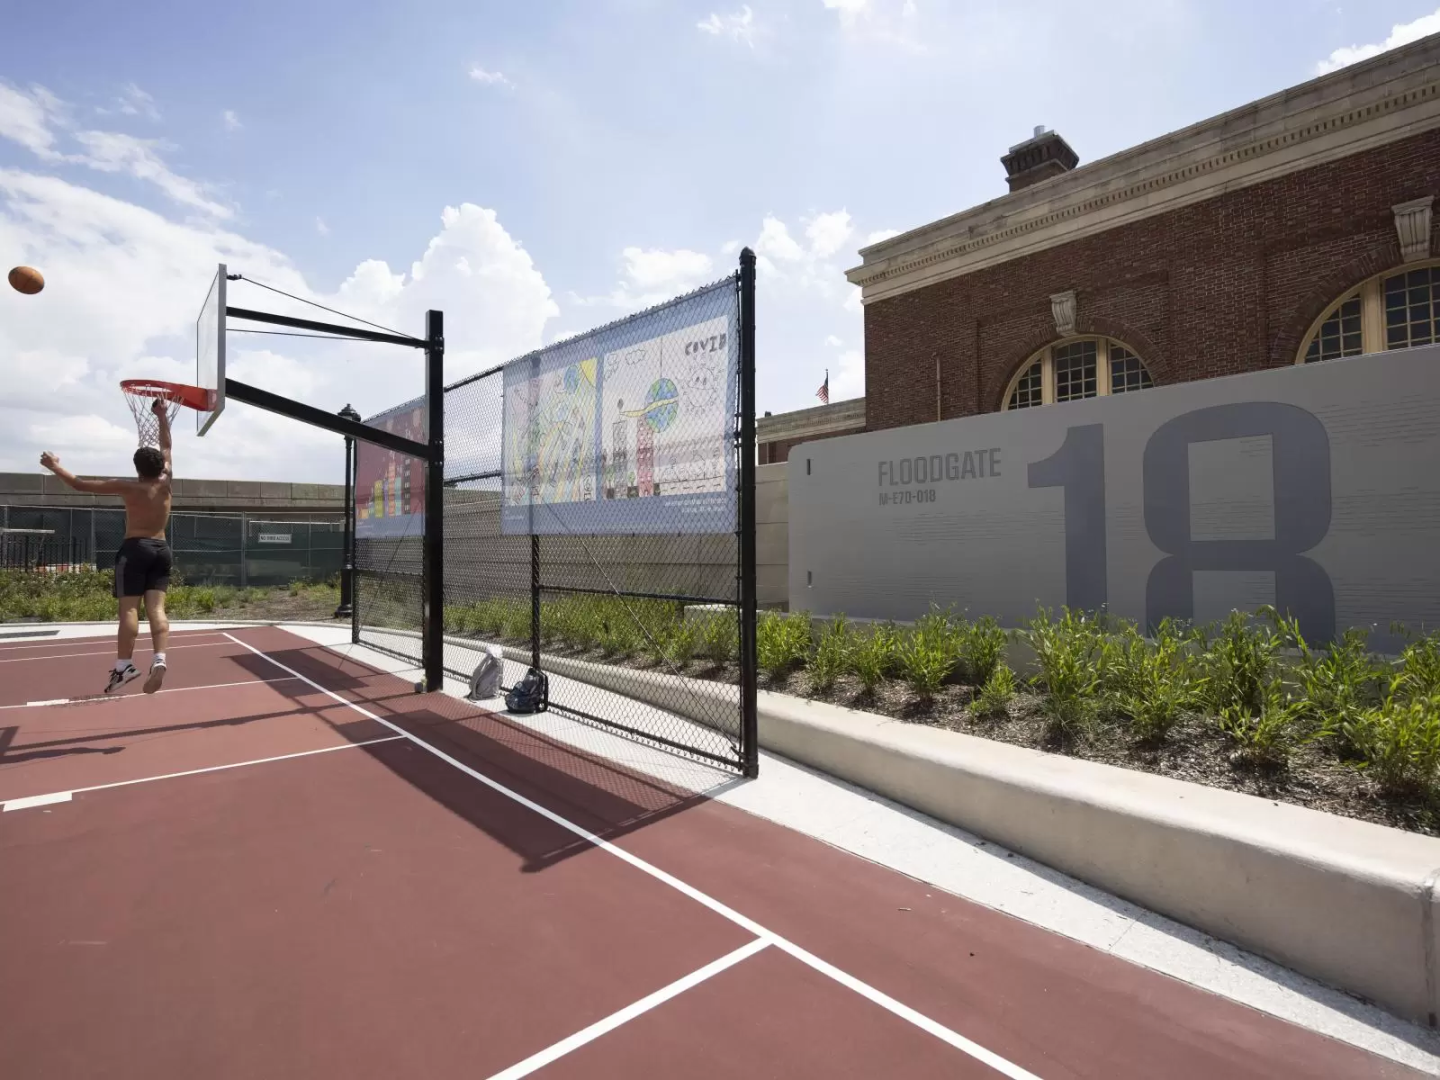 urban basketball court with floodgate #18 behind it